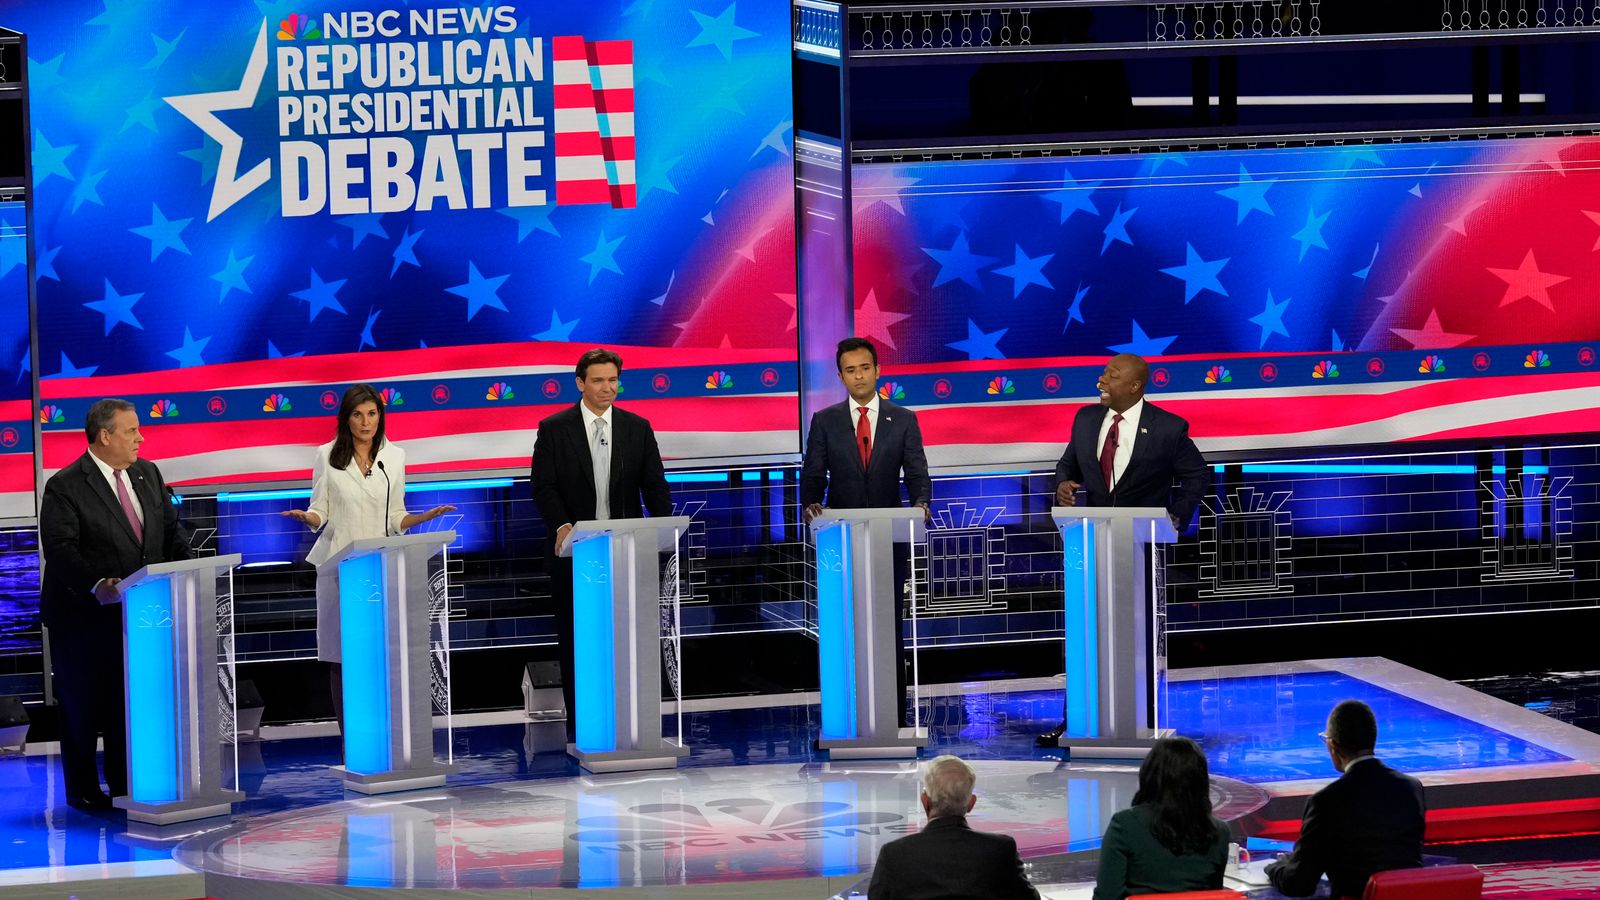 Republican presidential rivals lock horns as absent Donald Trump mocks 'unwatchable' debate